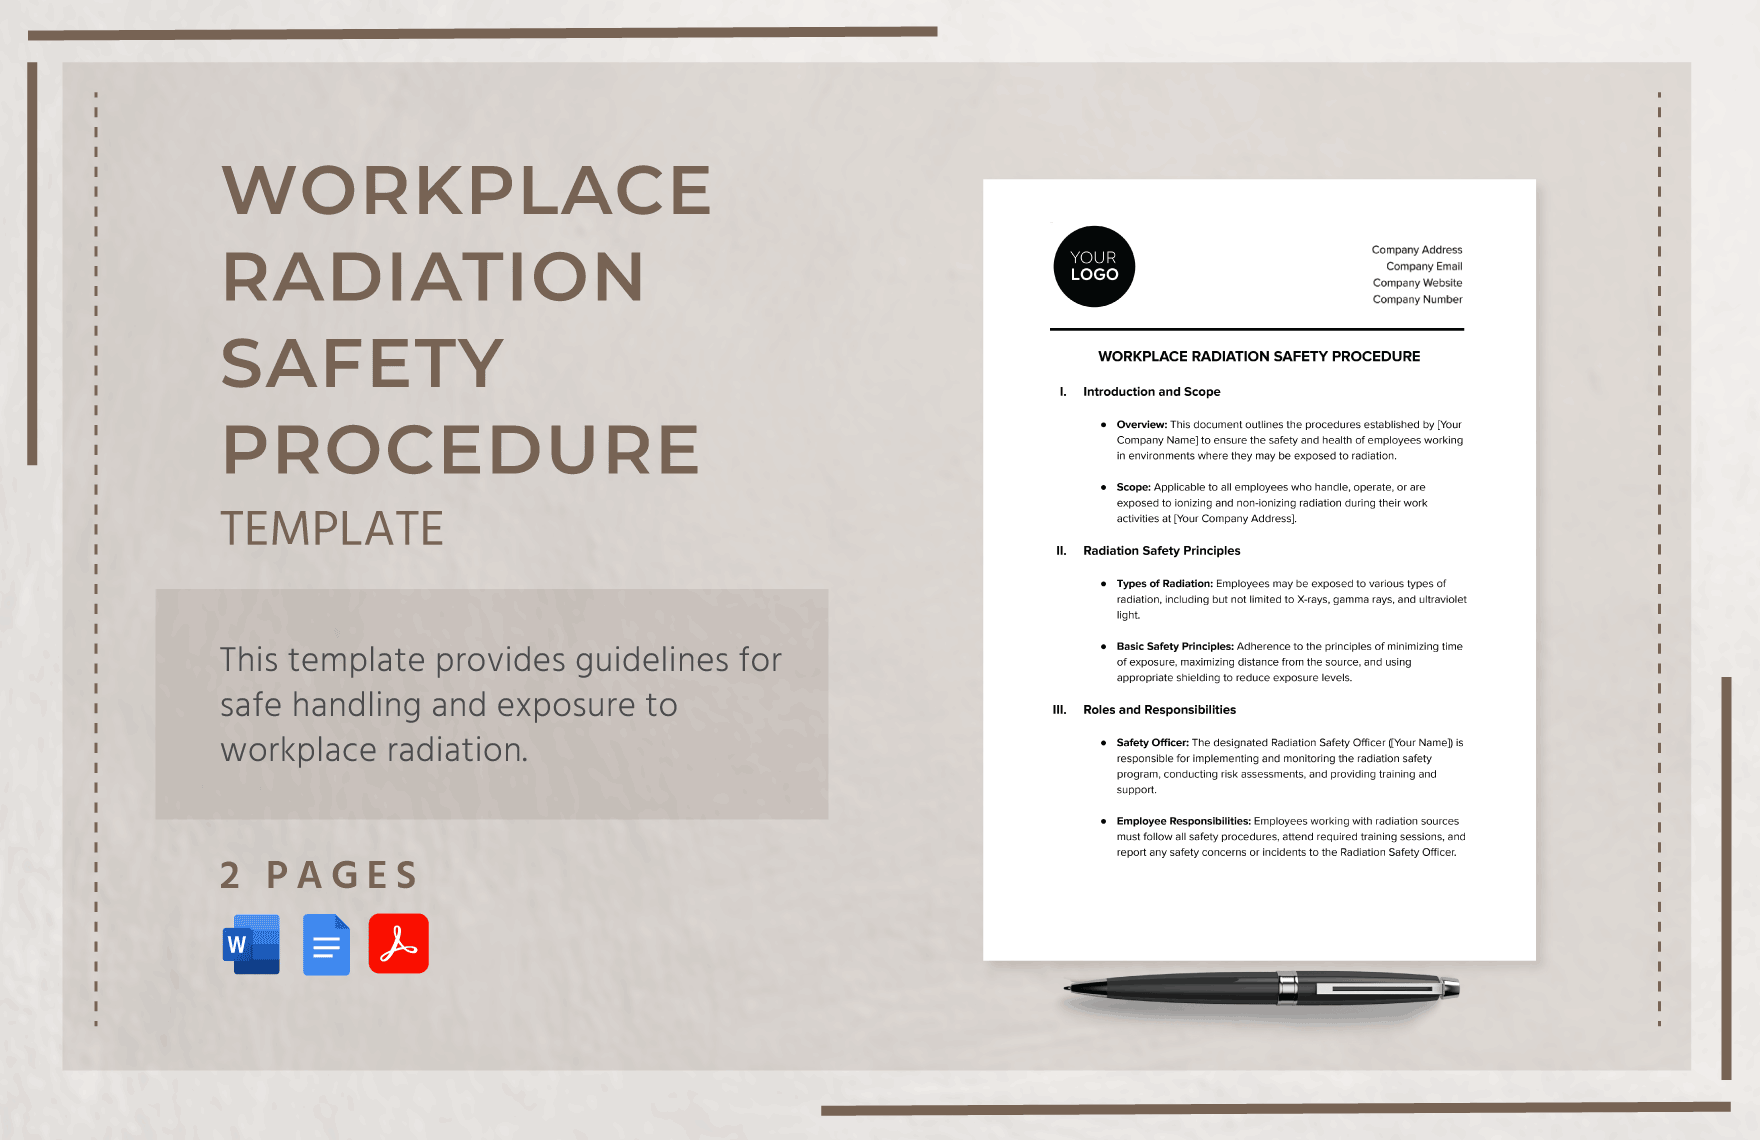 Workplace Radiation Safety Procedure Template in Word, Google Docs, PDF